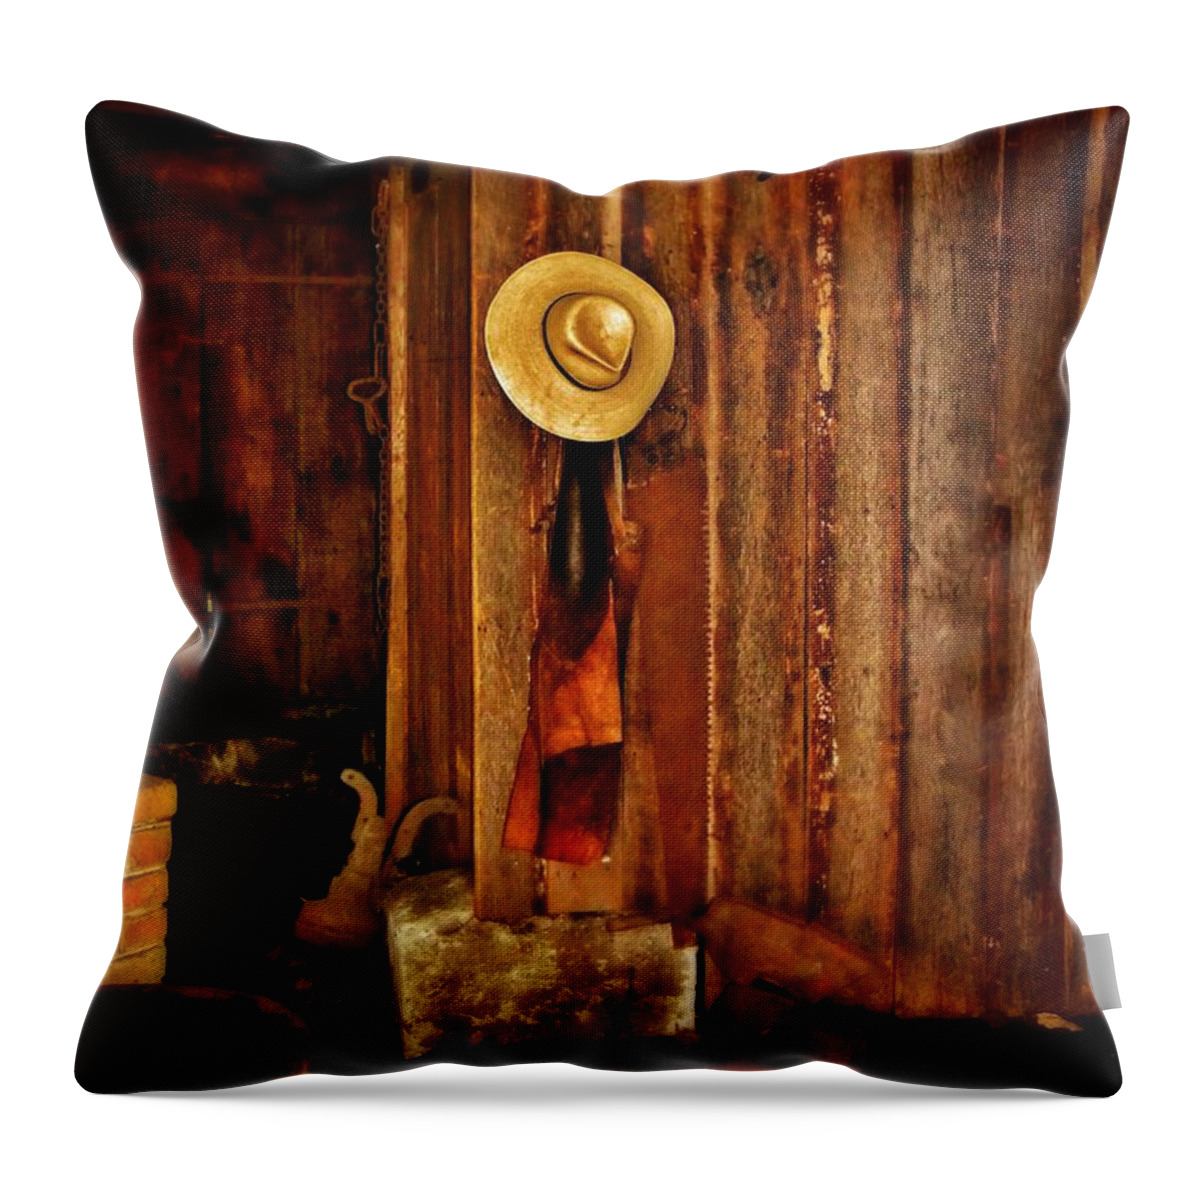 Blacksmith Throw Pillow featuring the photograph The Blacksmith's Hat by Jean Goodwin Brooks